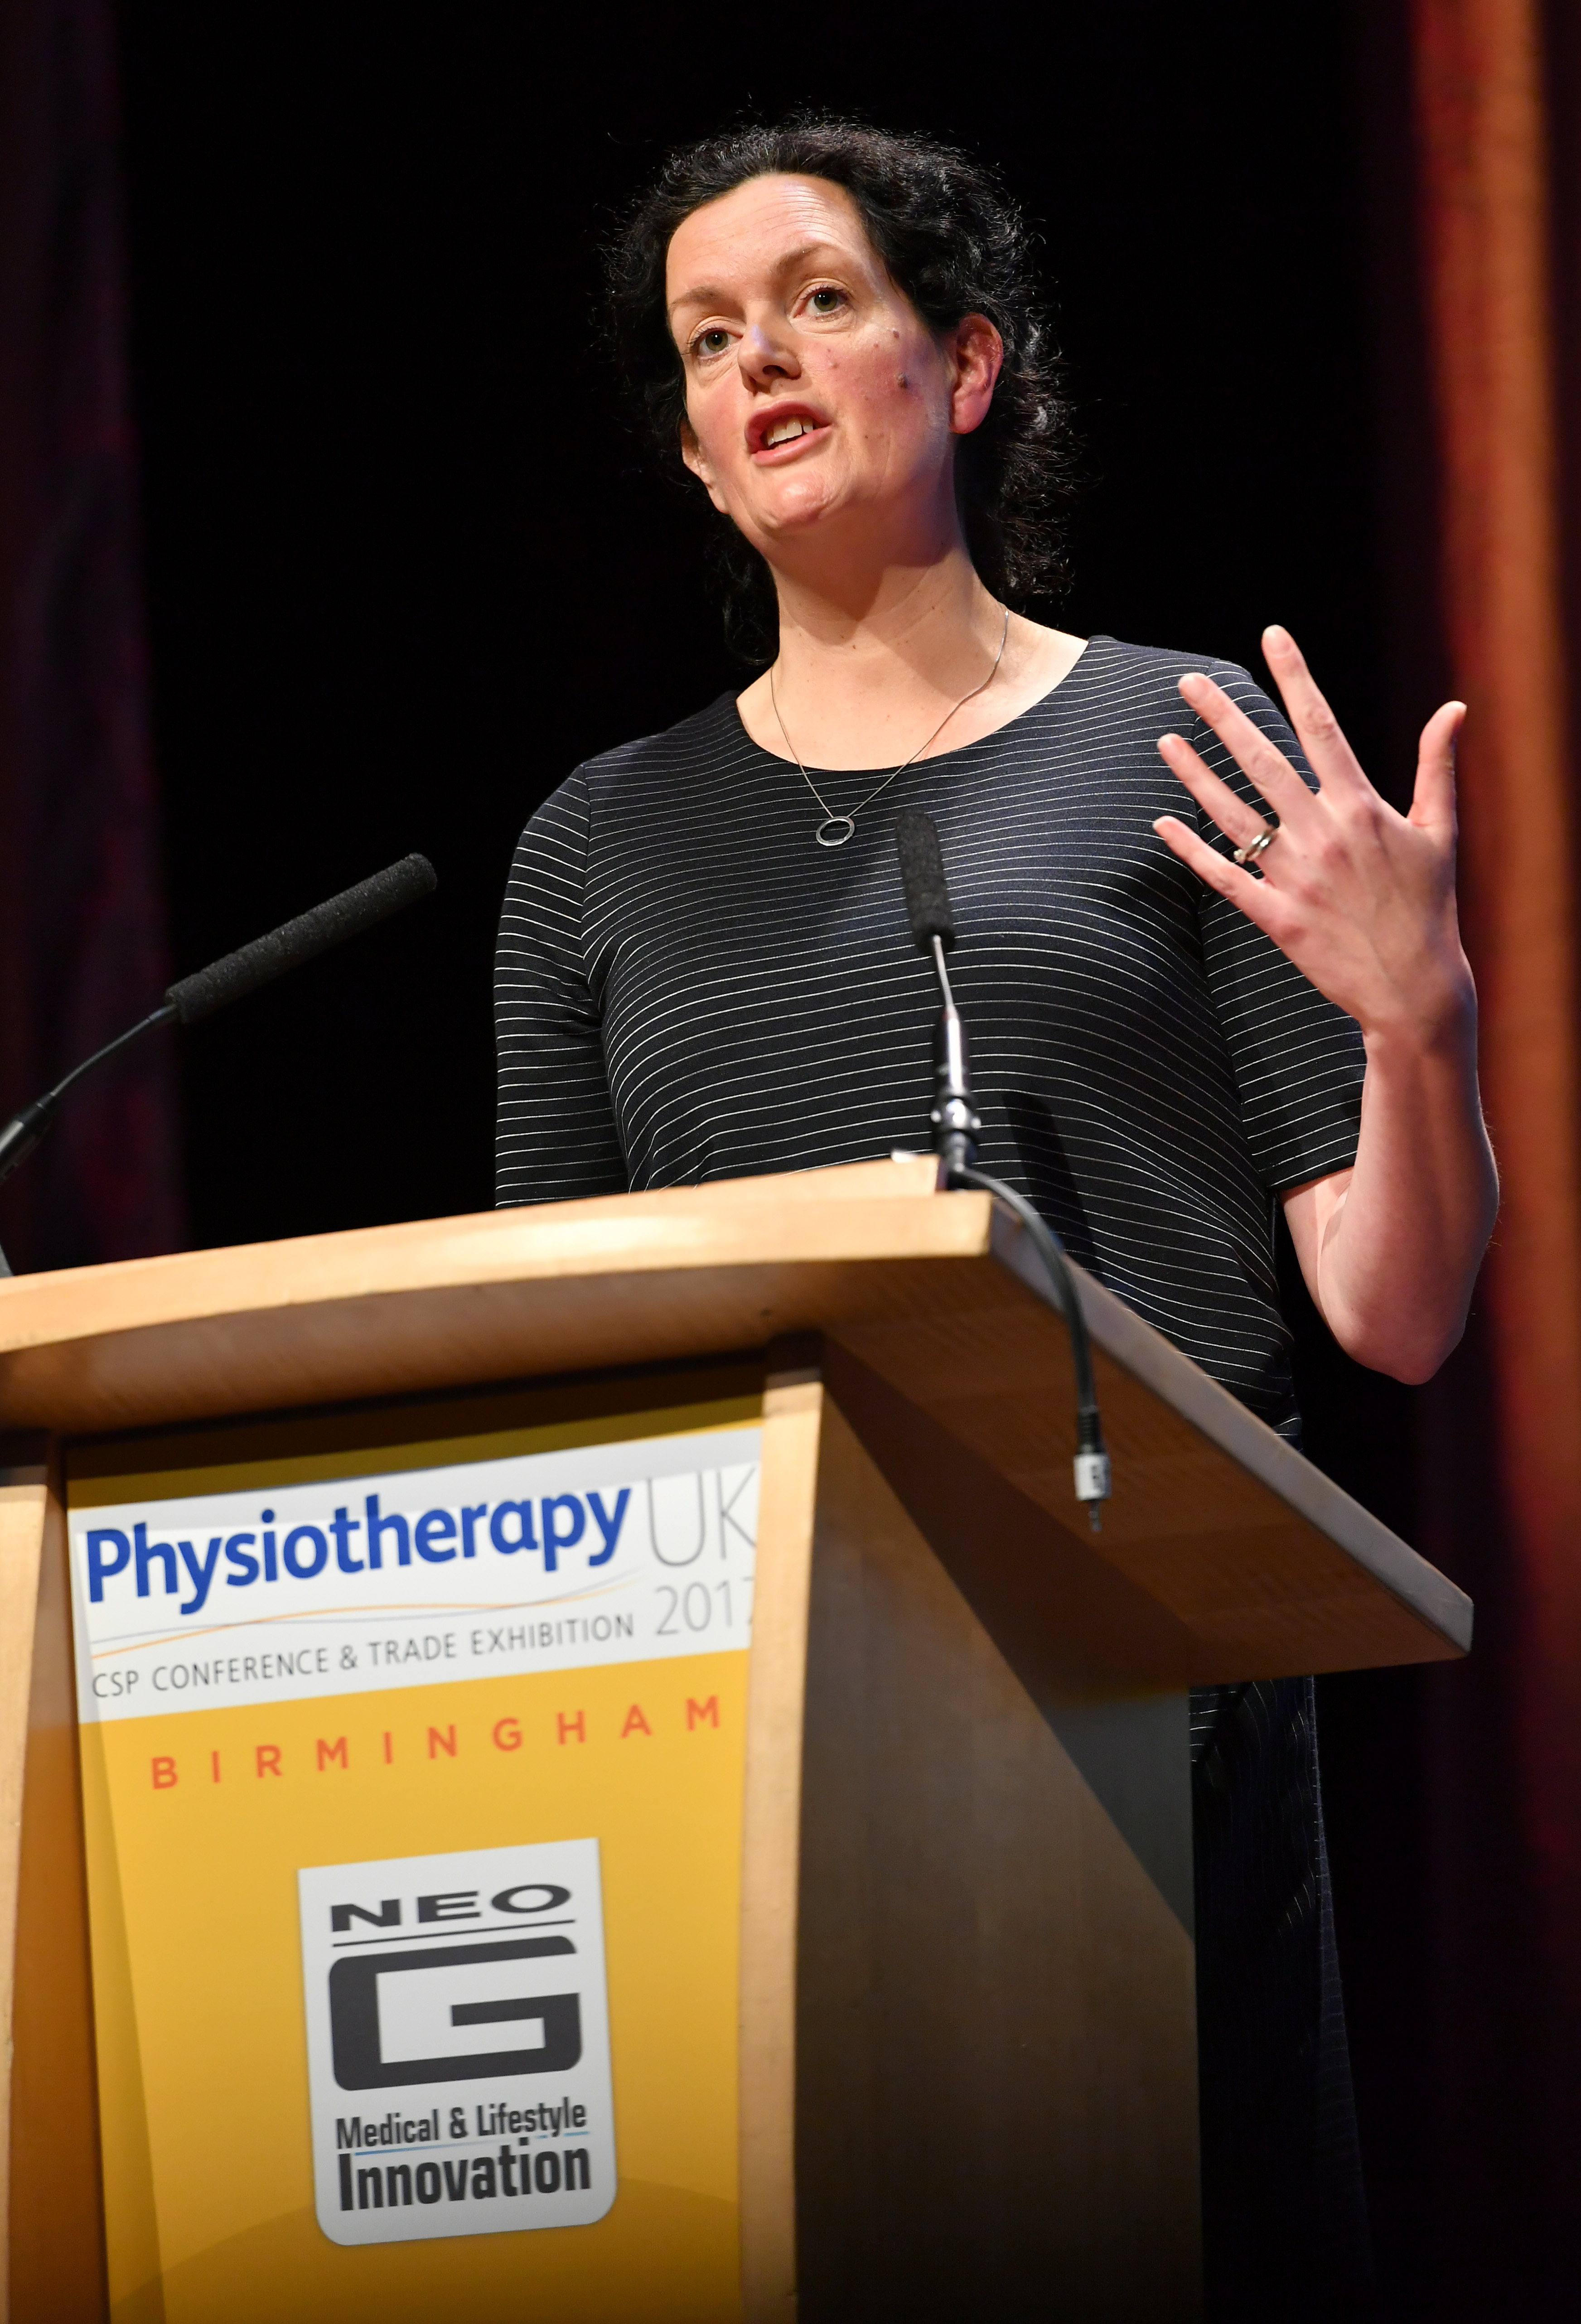 #Physio17: Physios need to help primary care from ‘falling over’